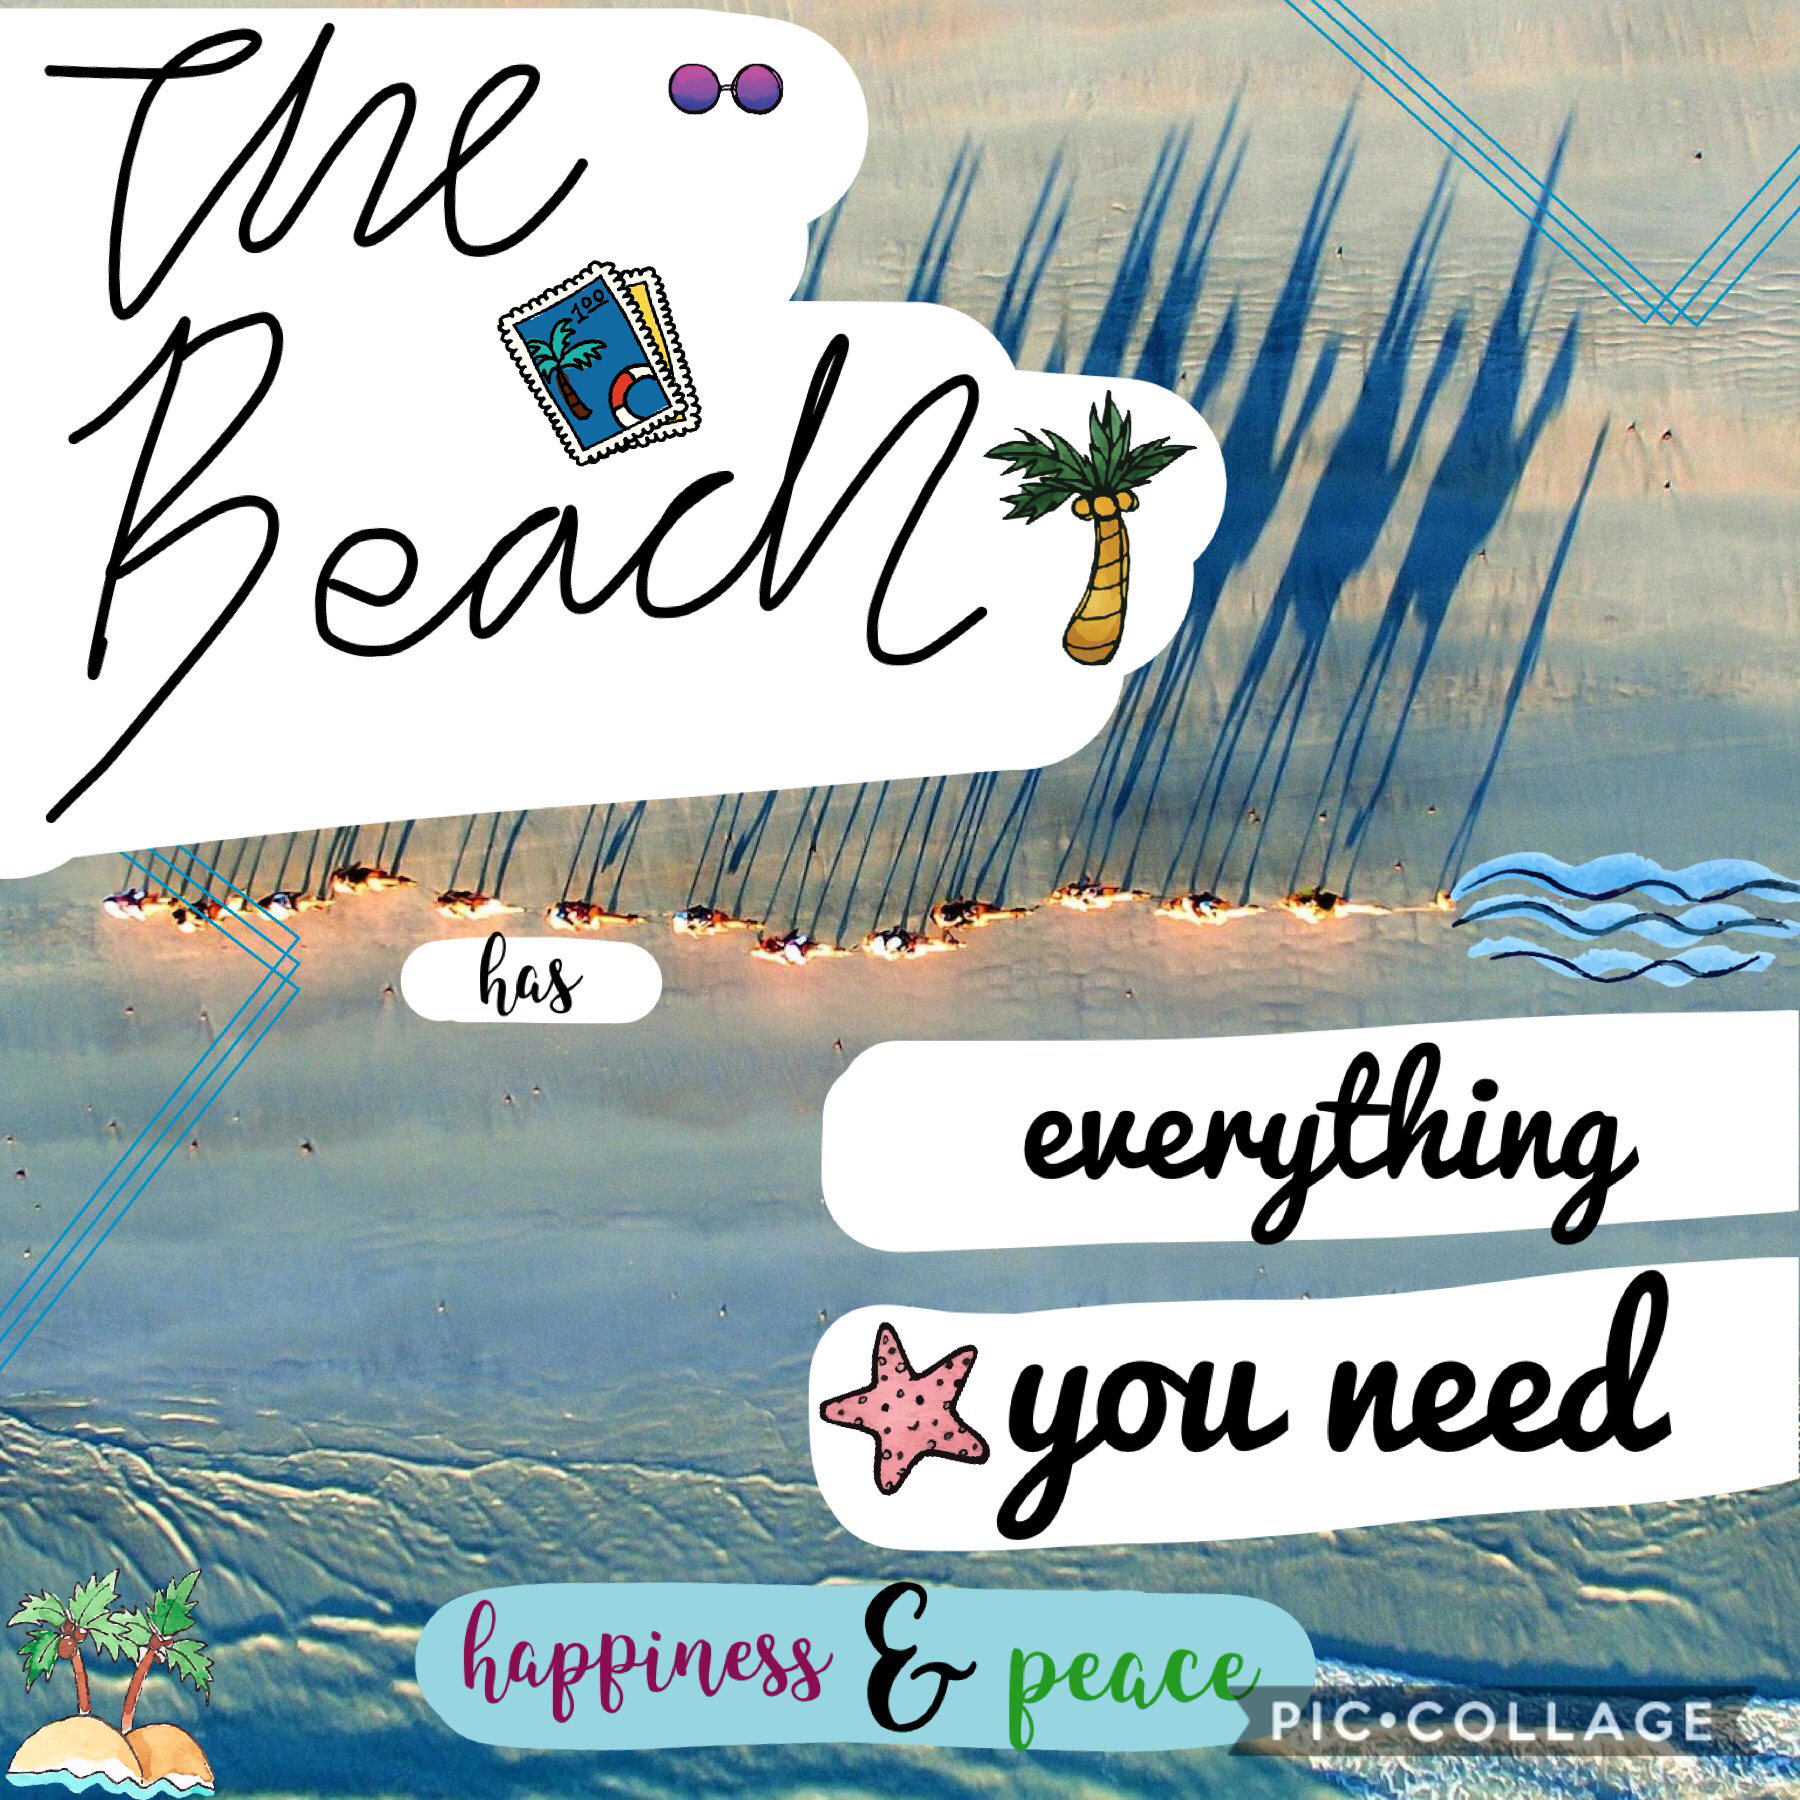 🌀TAP🌀
 
 🏝 I love the beach 🏝 I’m not sure if I used too many stickers 😐
QOTD: Swimming in a pool or the sea ? 🌊 🏊🏻‍♀️ 
AOTD: I’m not sure... pool maybe 🏊🏻‍♀️ 
